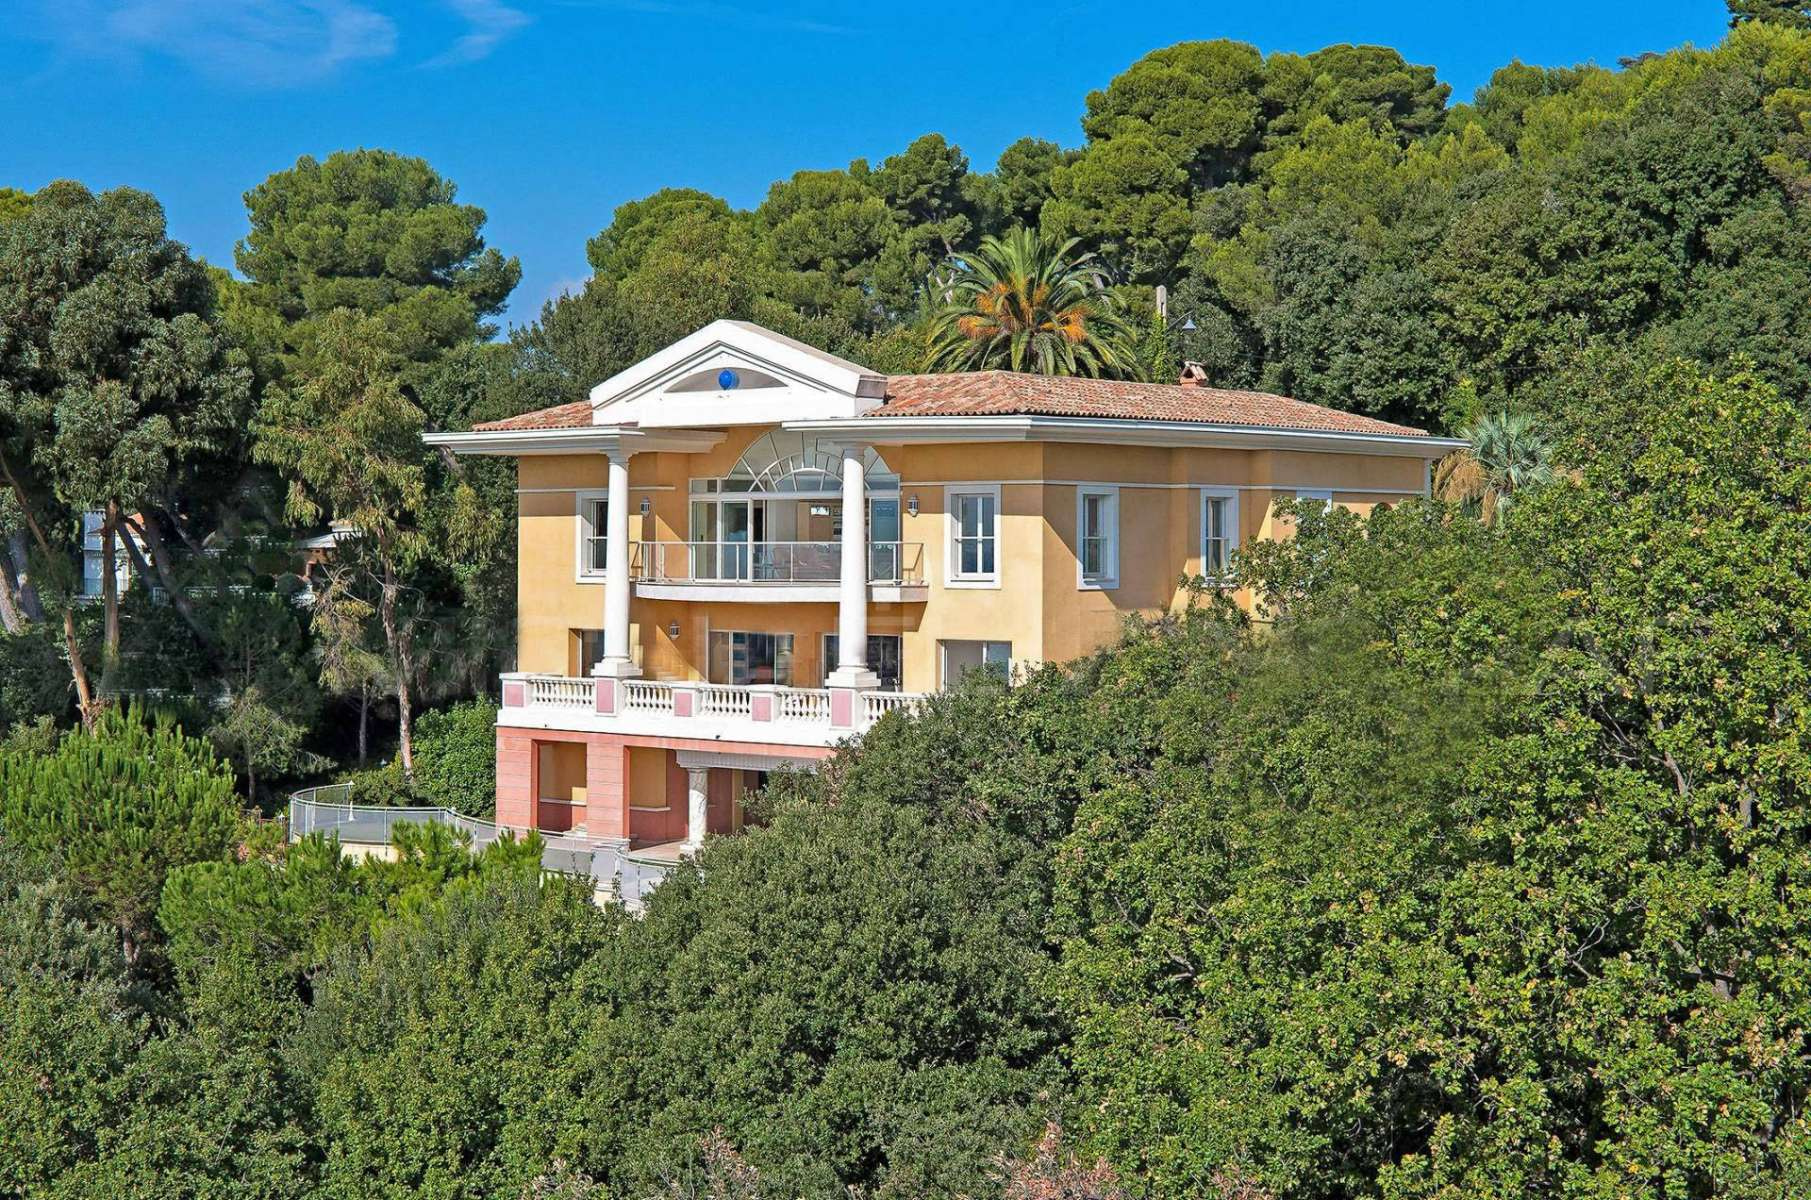 Sale villa in Cannes with panoramic sea view